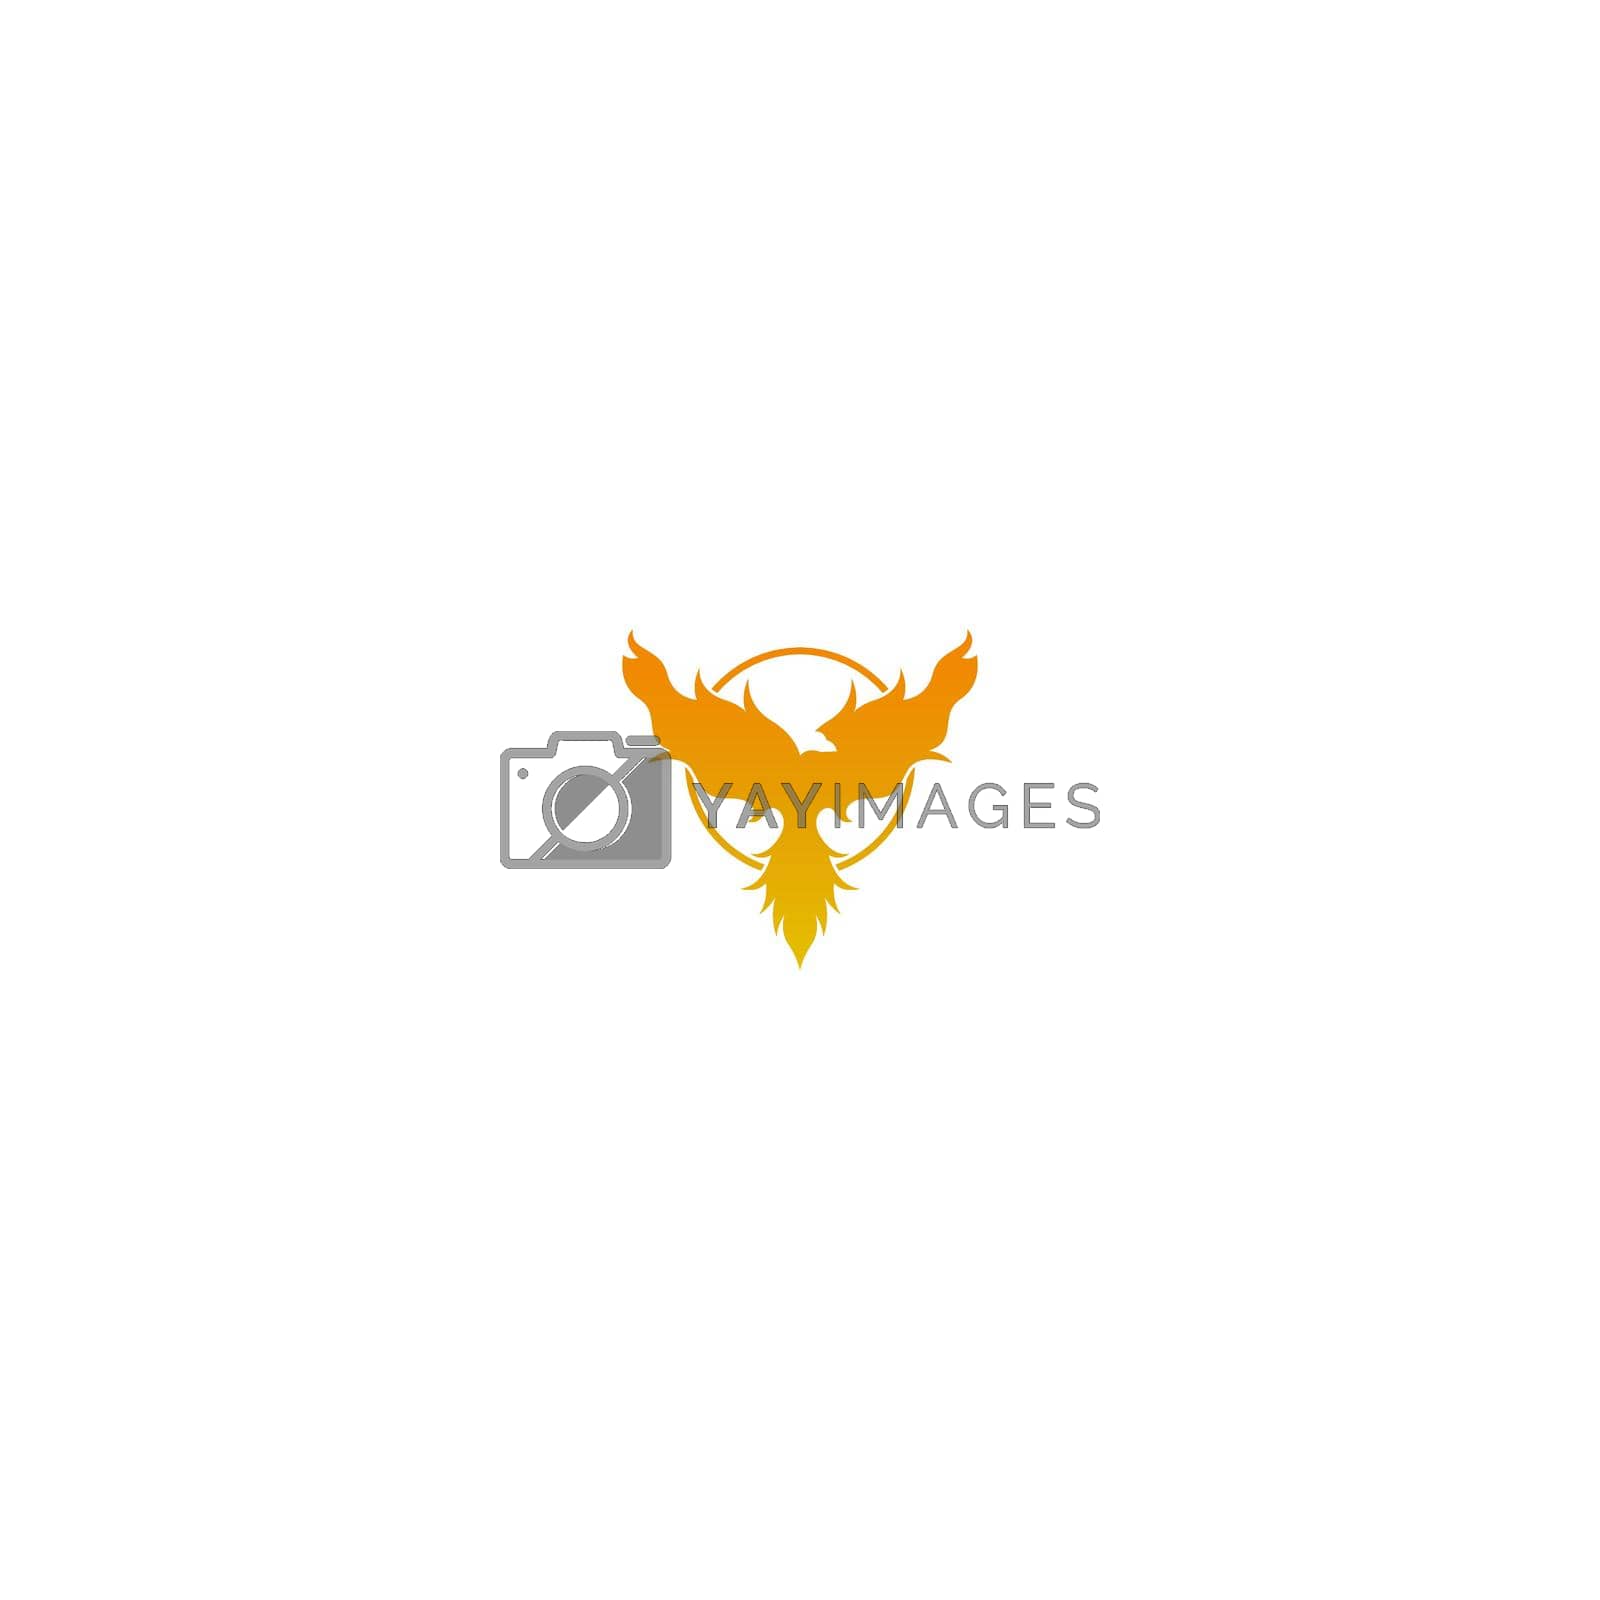 Royalty free image of Phoenix logo icon design template vector by bellaxbudhong3